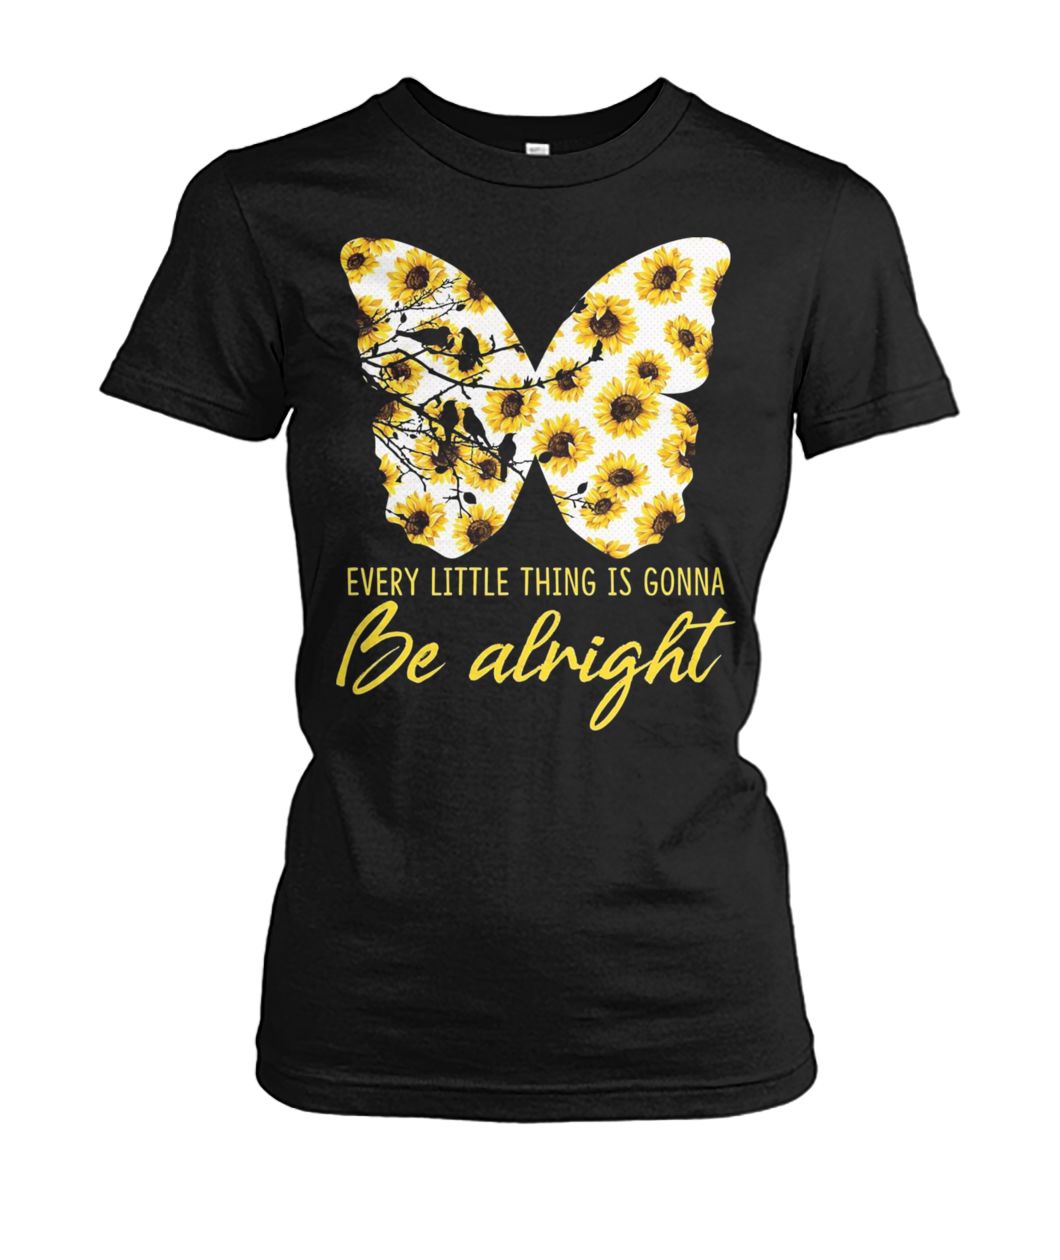 Sunflower butterfly every little thing gonna be alright women's crew tee